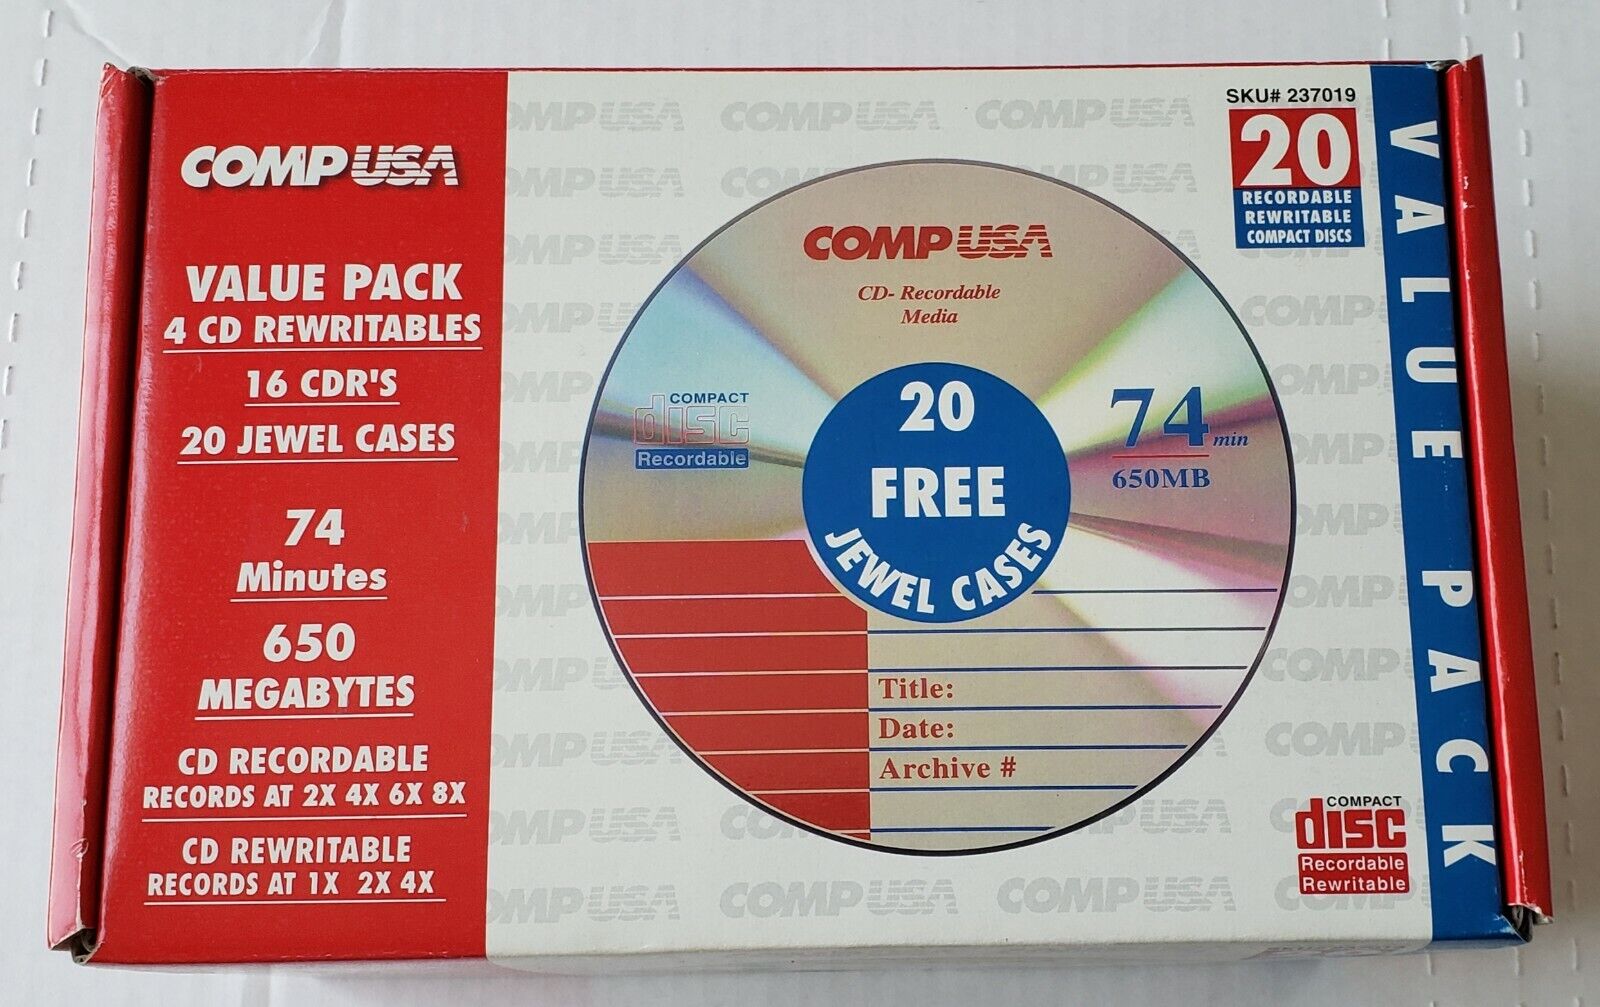 CompUSA - Value Pack: 4 CD-RW's & 16 CDR's (20 Jewel Casses). New (Open Box).